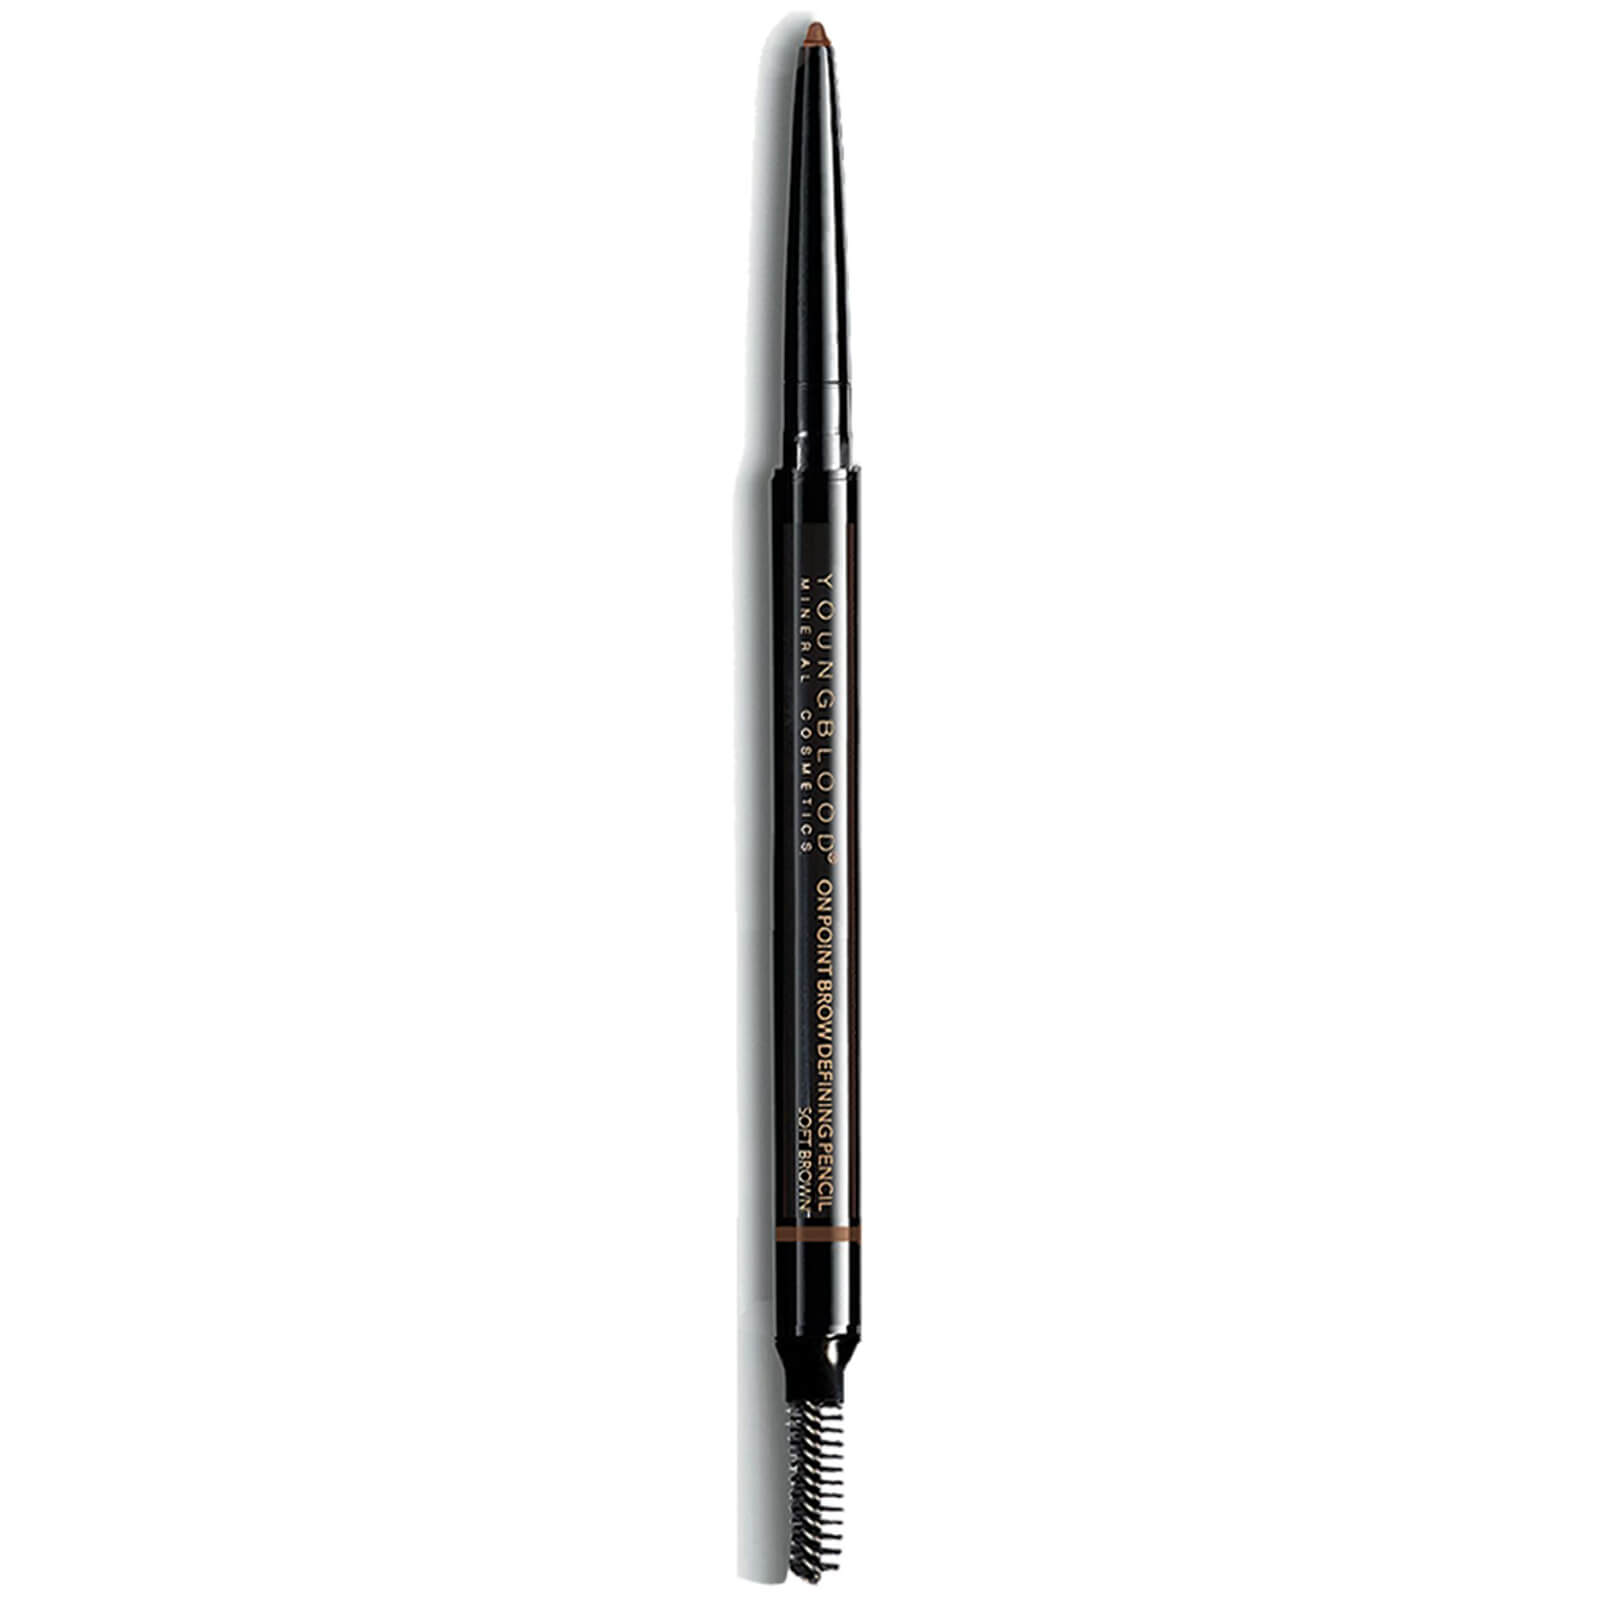 Youngblood On Point Brow Defining Pencil 0.35g (Various Shades) - Soft Brown